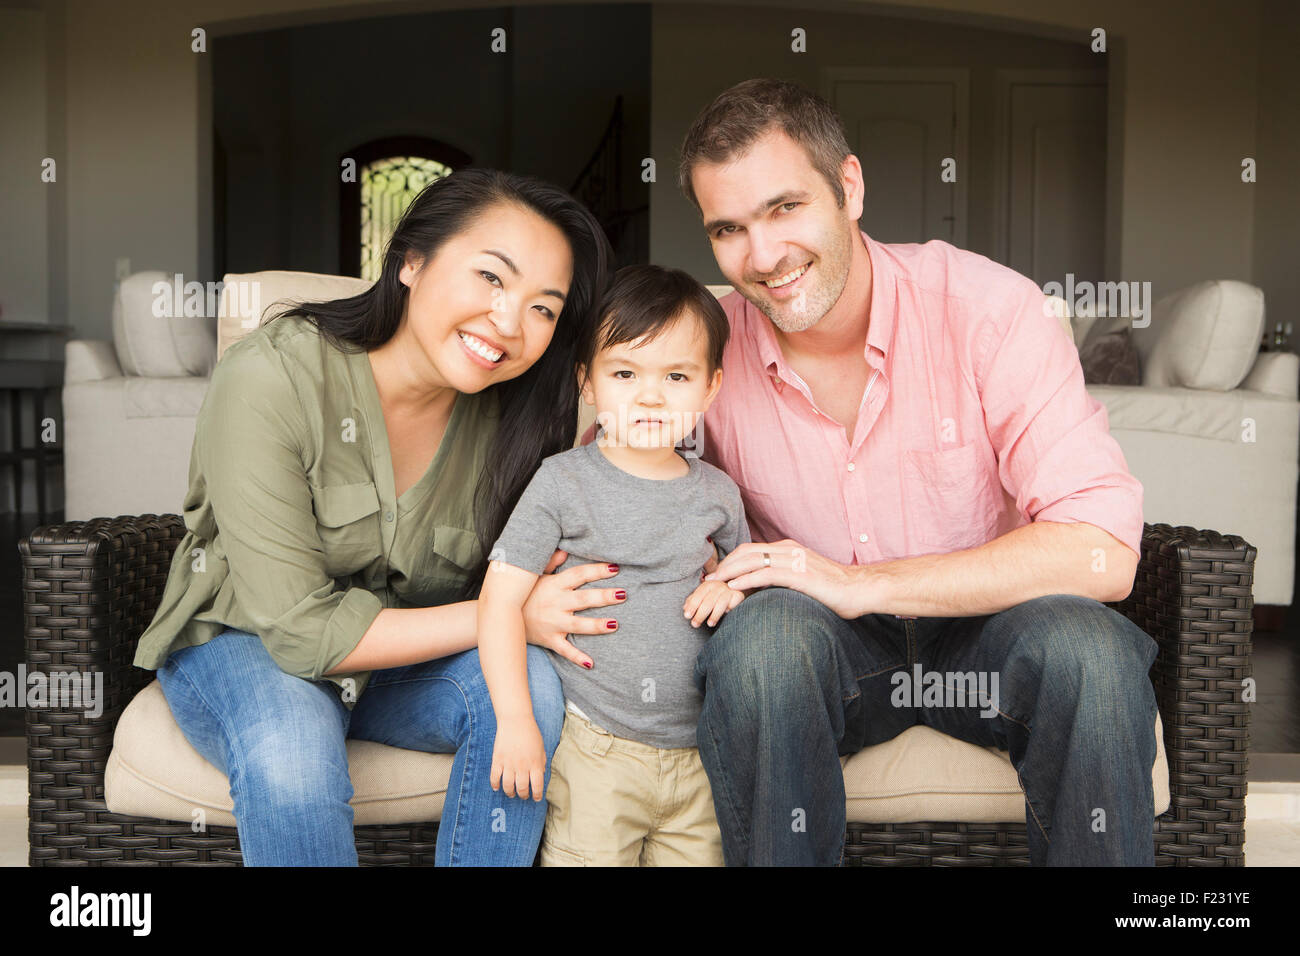 Smiling man and woman sitting side by side on a sofa, posing for a picture with their young son. Stock Photo